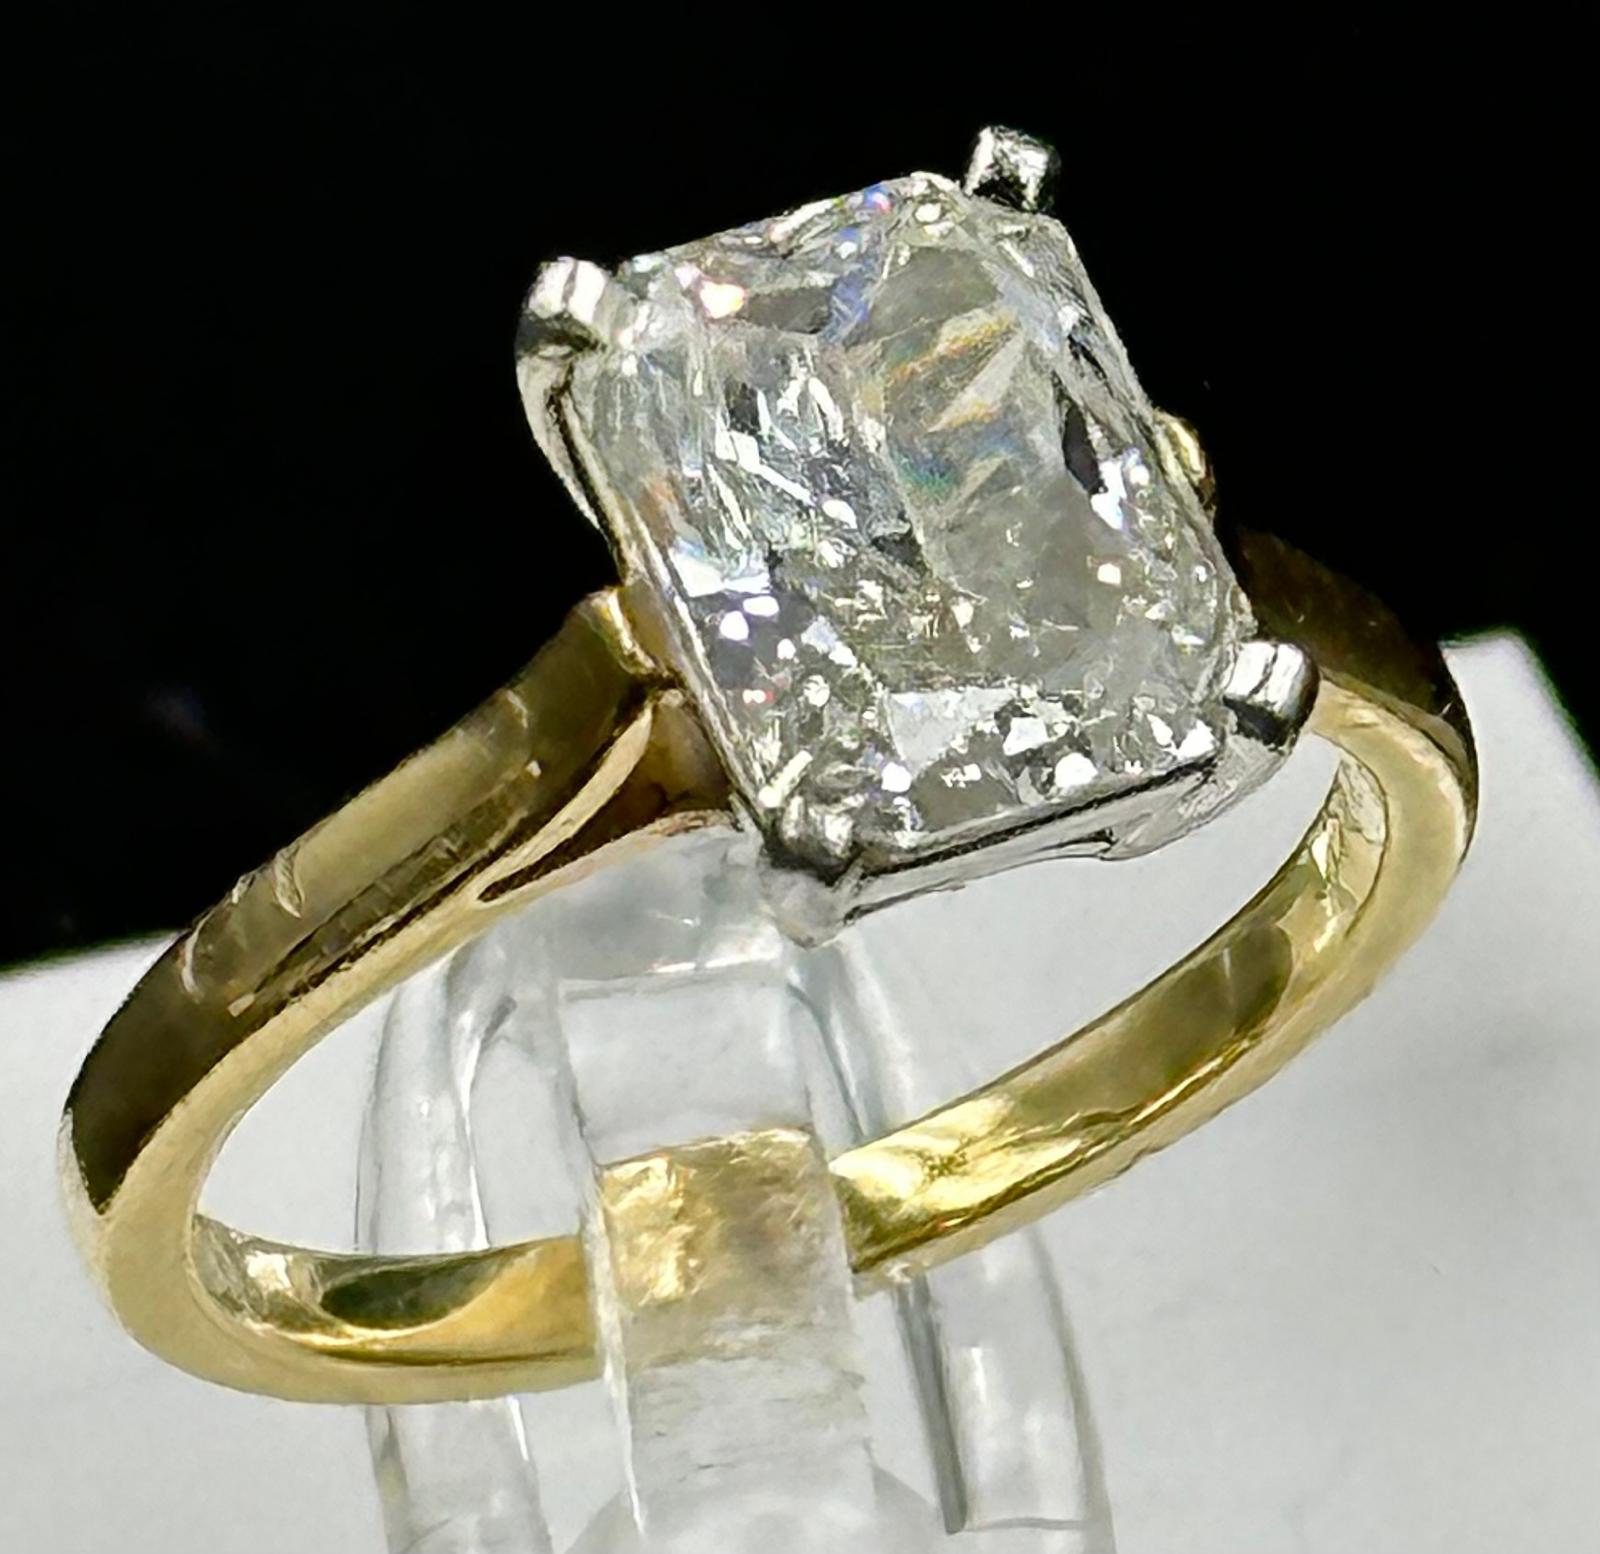 2.10ct Cushion cut diamond solitaire ring mounted in platinum and 18ct gold. Signed Tiffany & Co. - Image 2 of 5